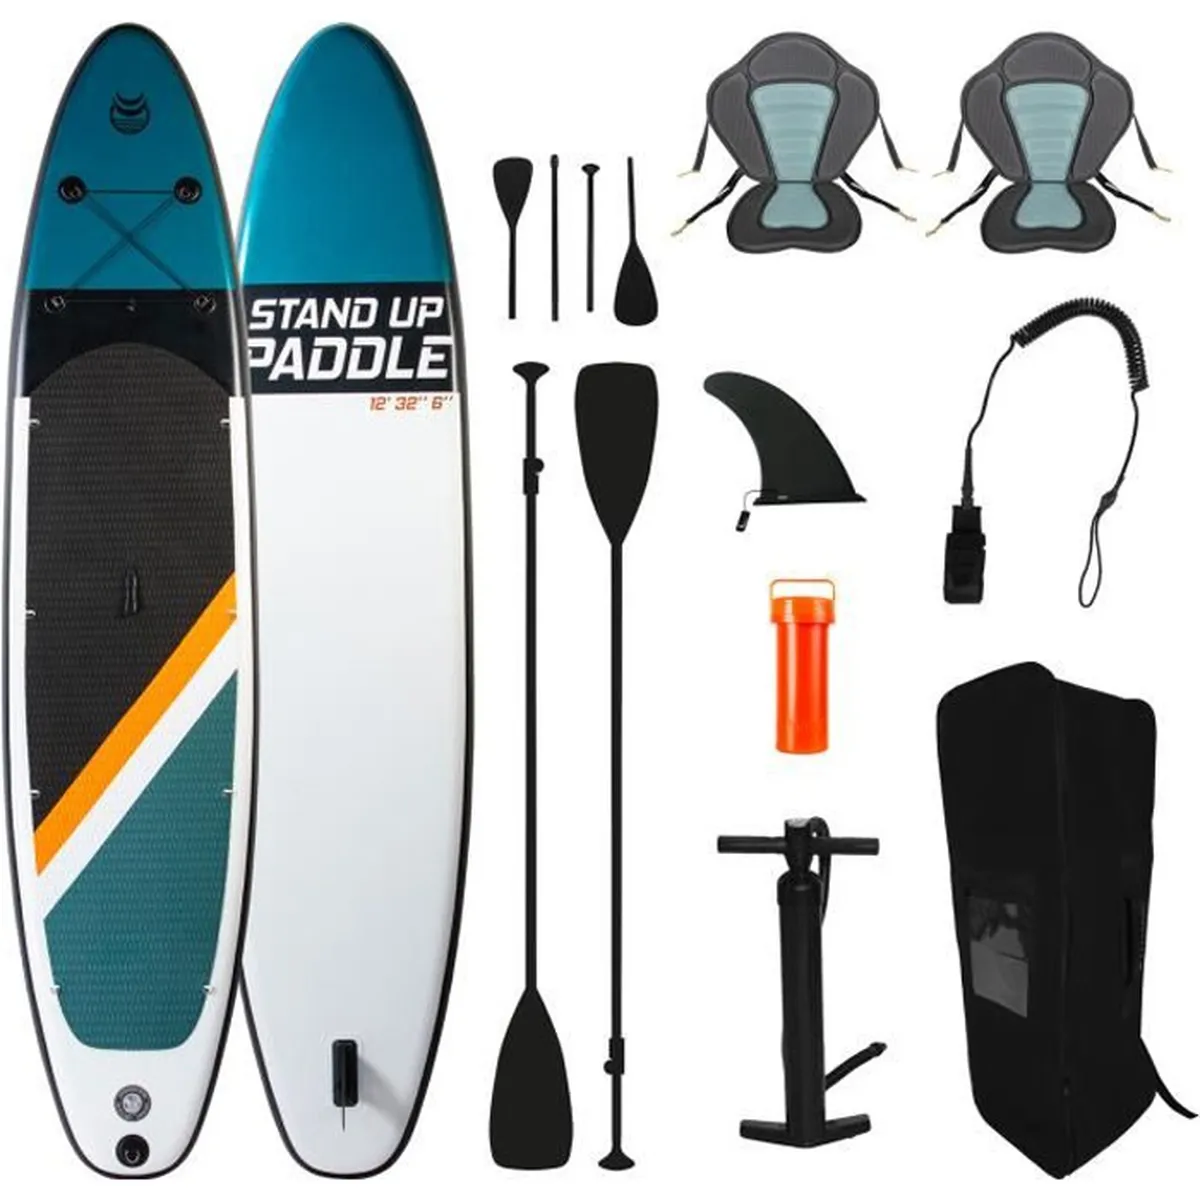 Bon plan : le paddle gonflable TWO © Cdiscount